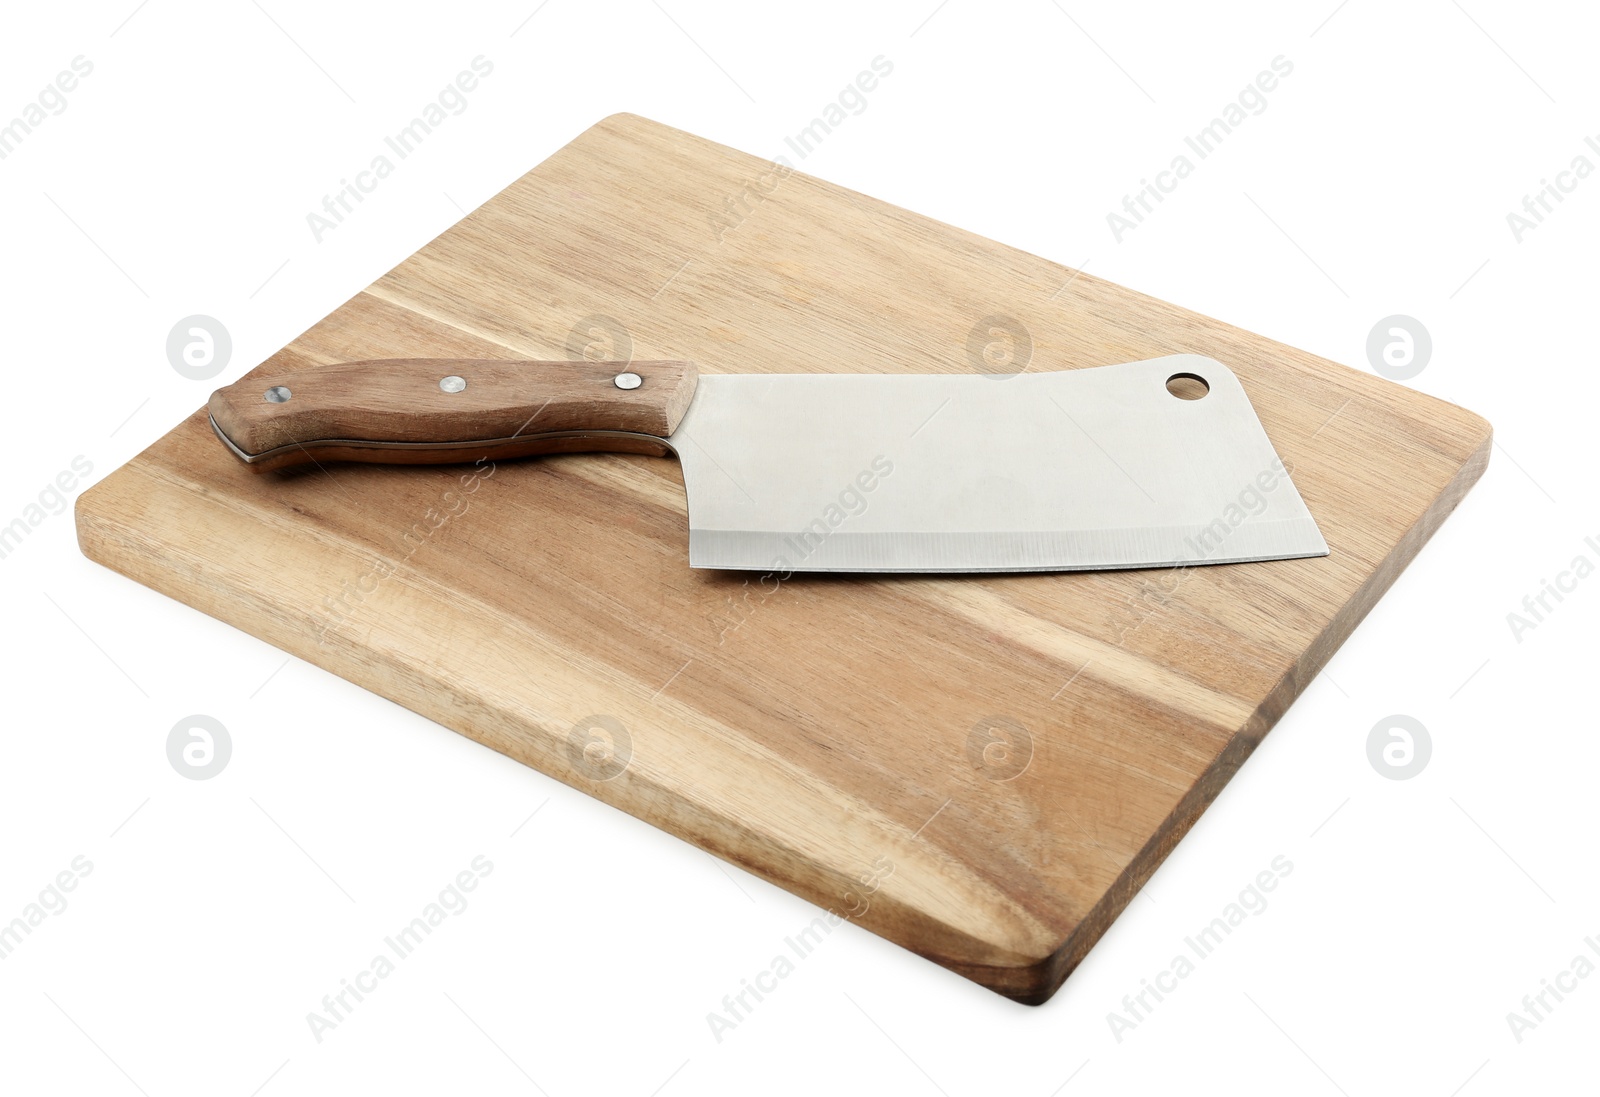 Photo of Large sharp cleaver knife with wooden board isolated on white